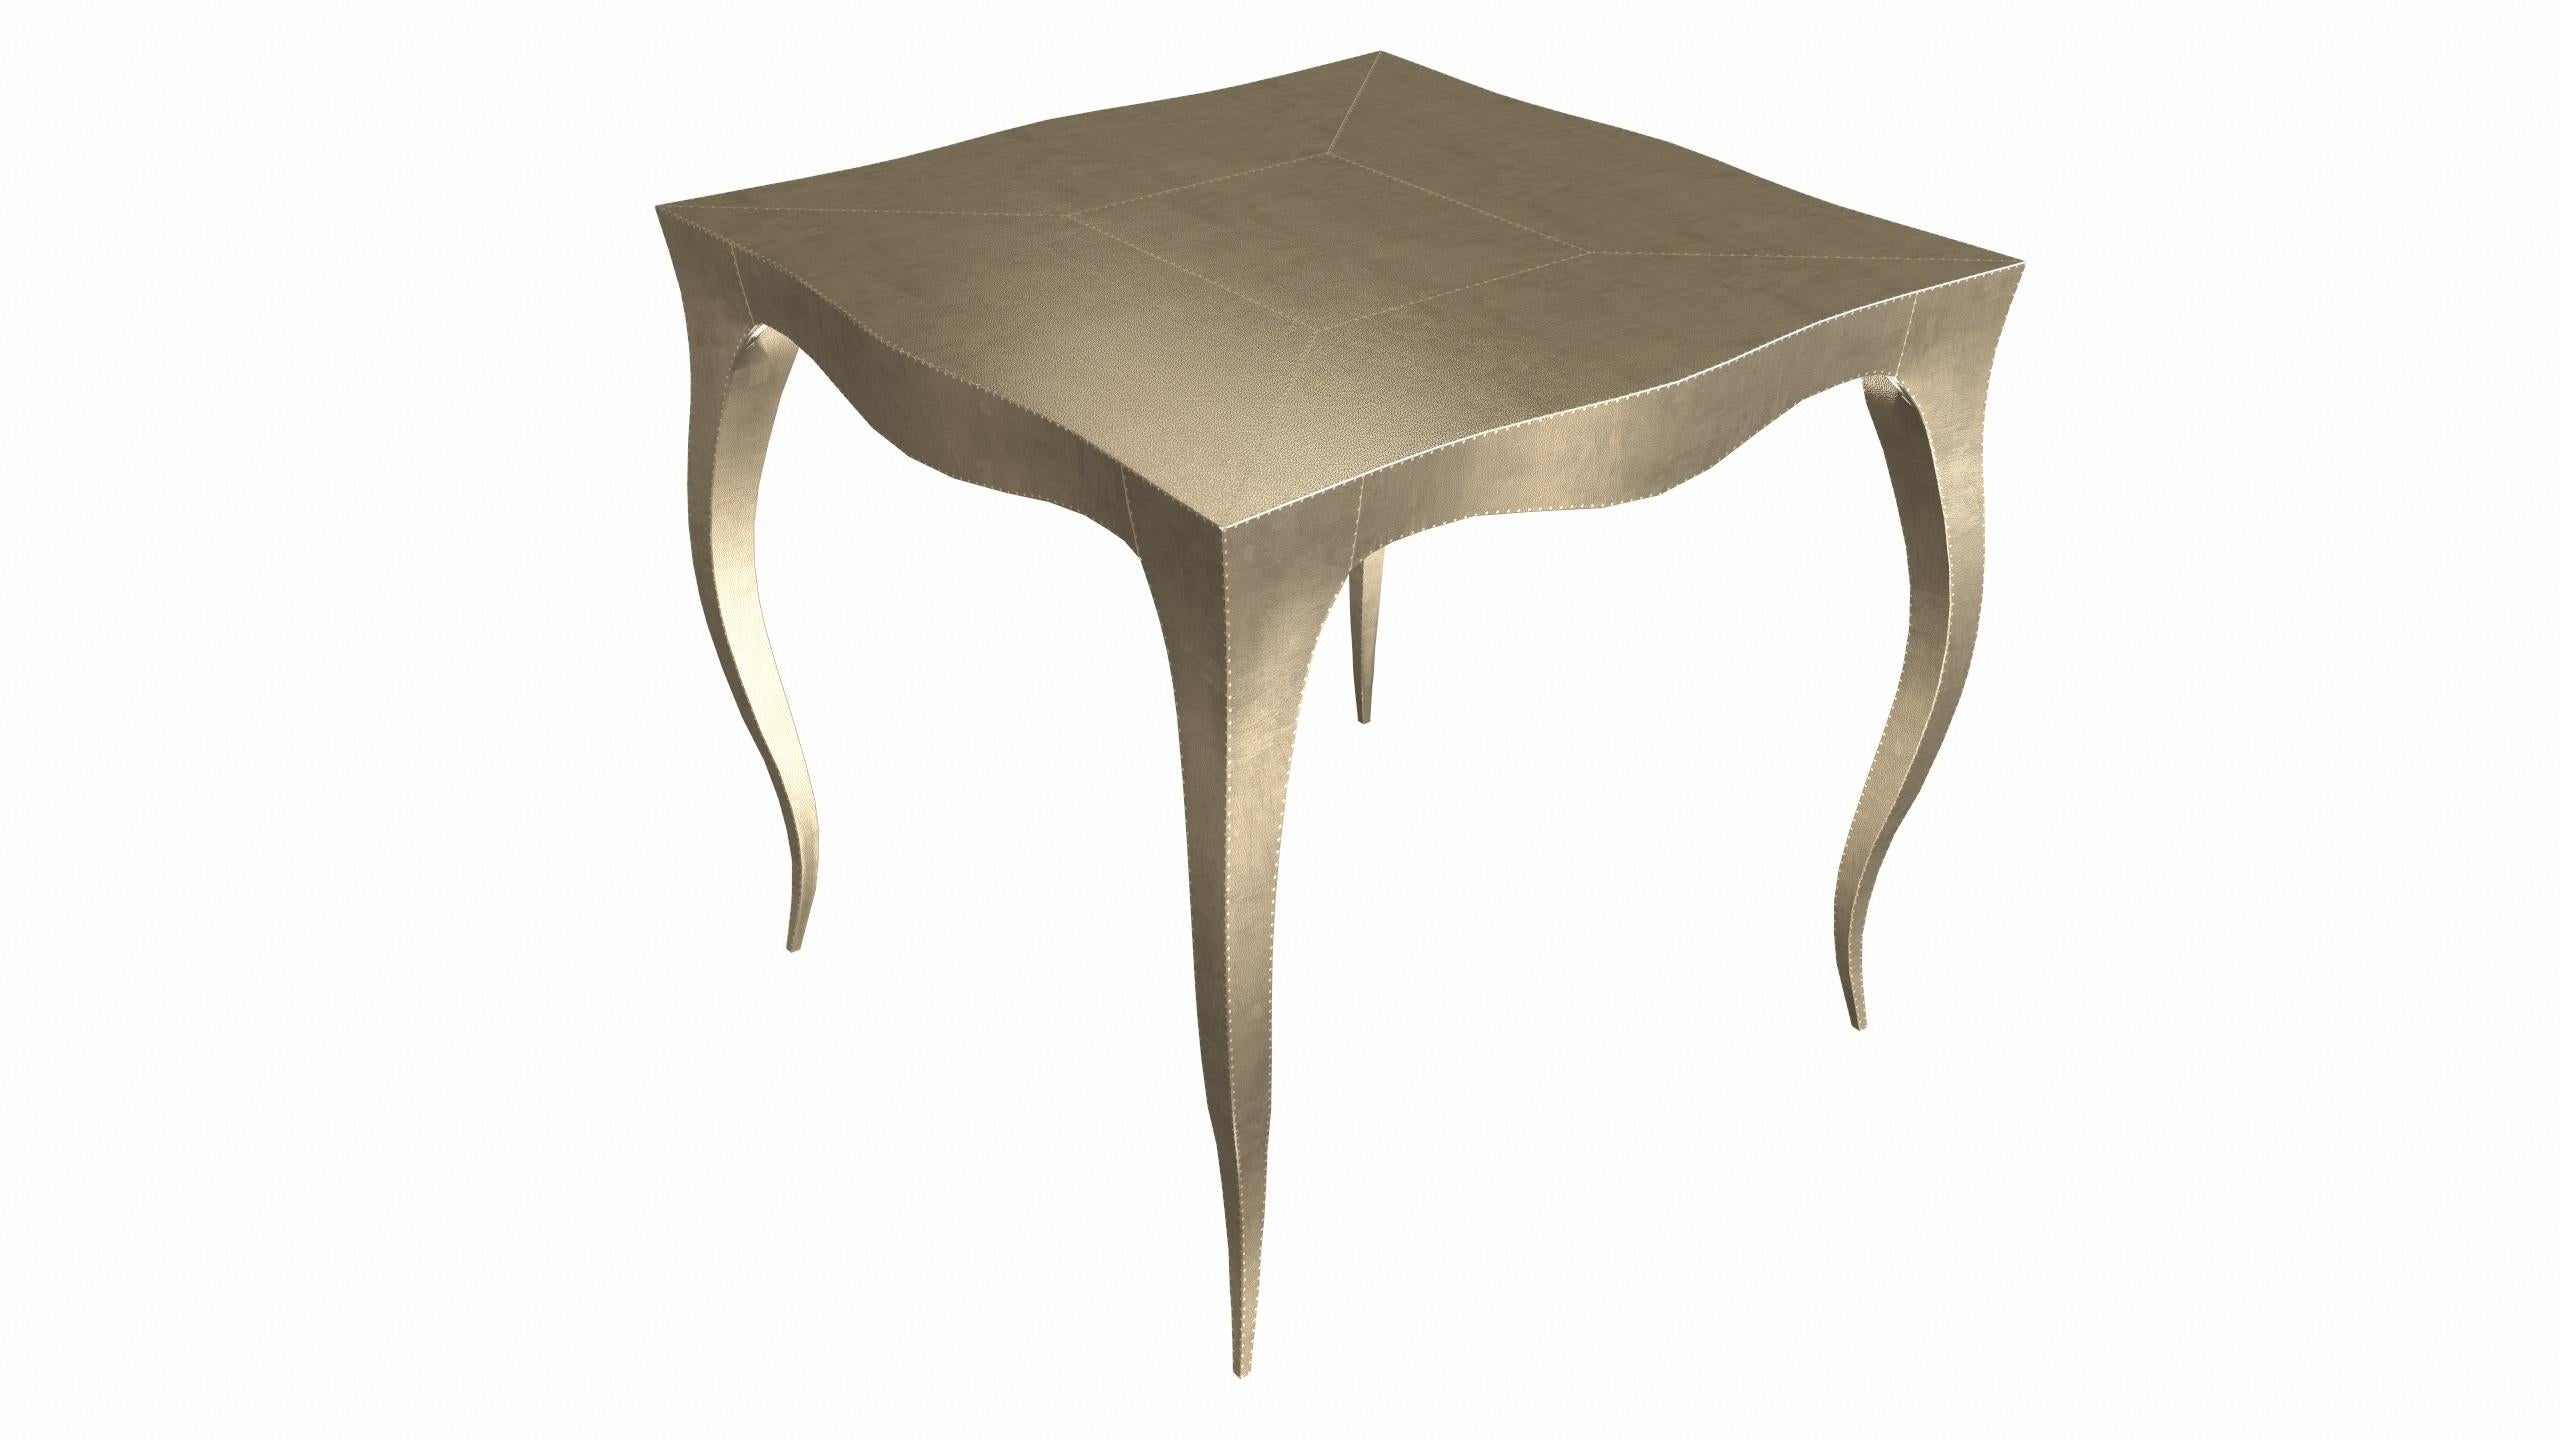 Metal Louise Art Nouveau Vanities Tables Mid. Hammered Brass by Paul Mathieu For Sale